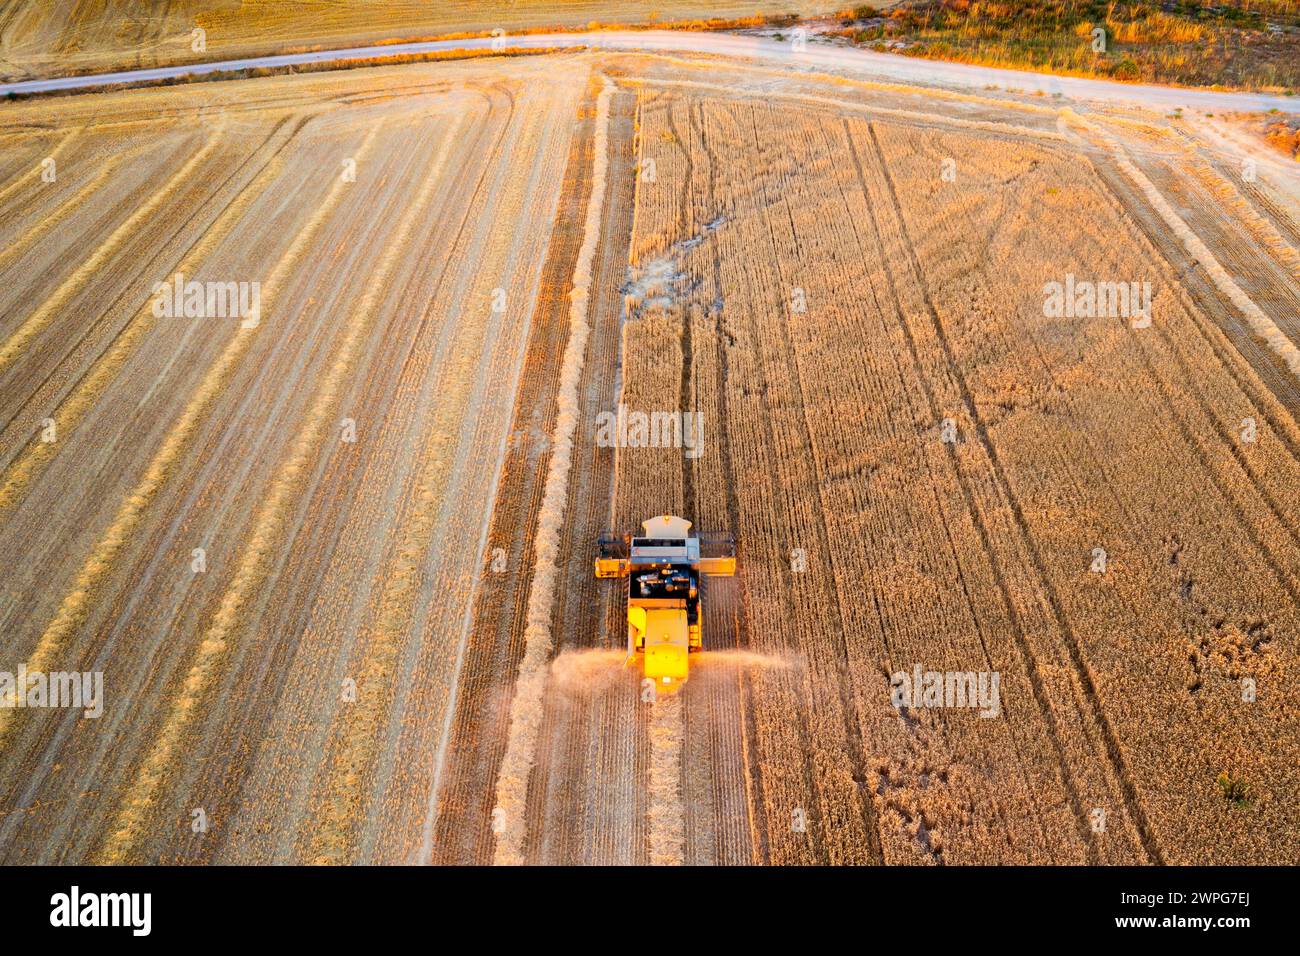 Aerial view of combine harvesting wheat harvest. Stock Photo